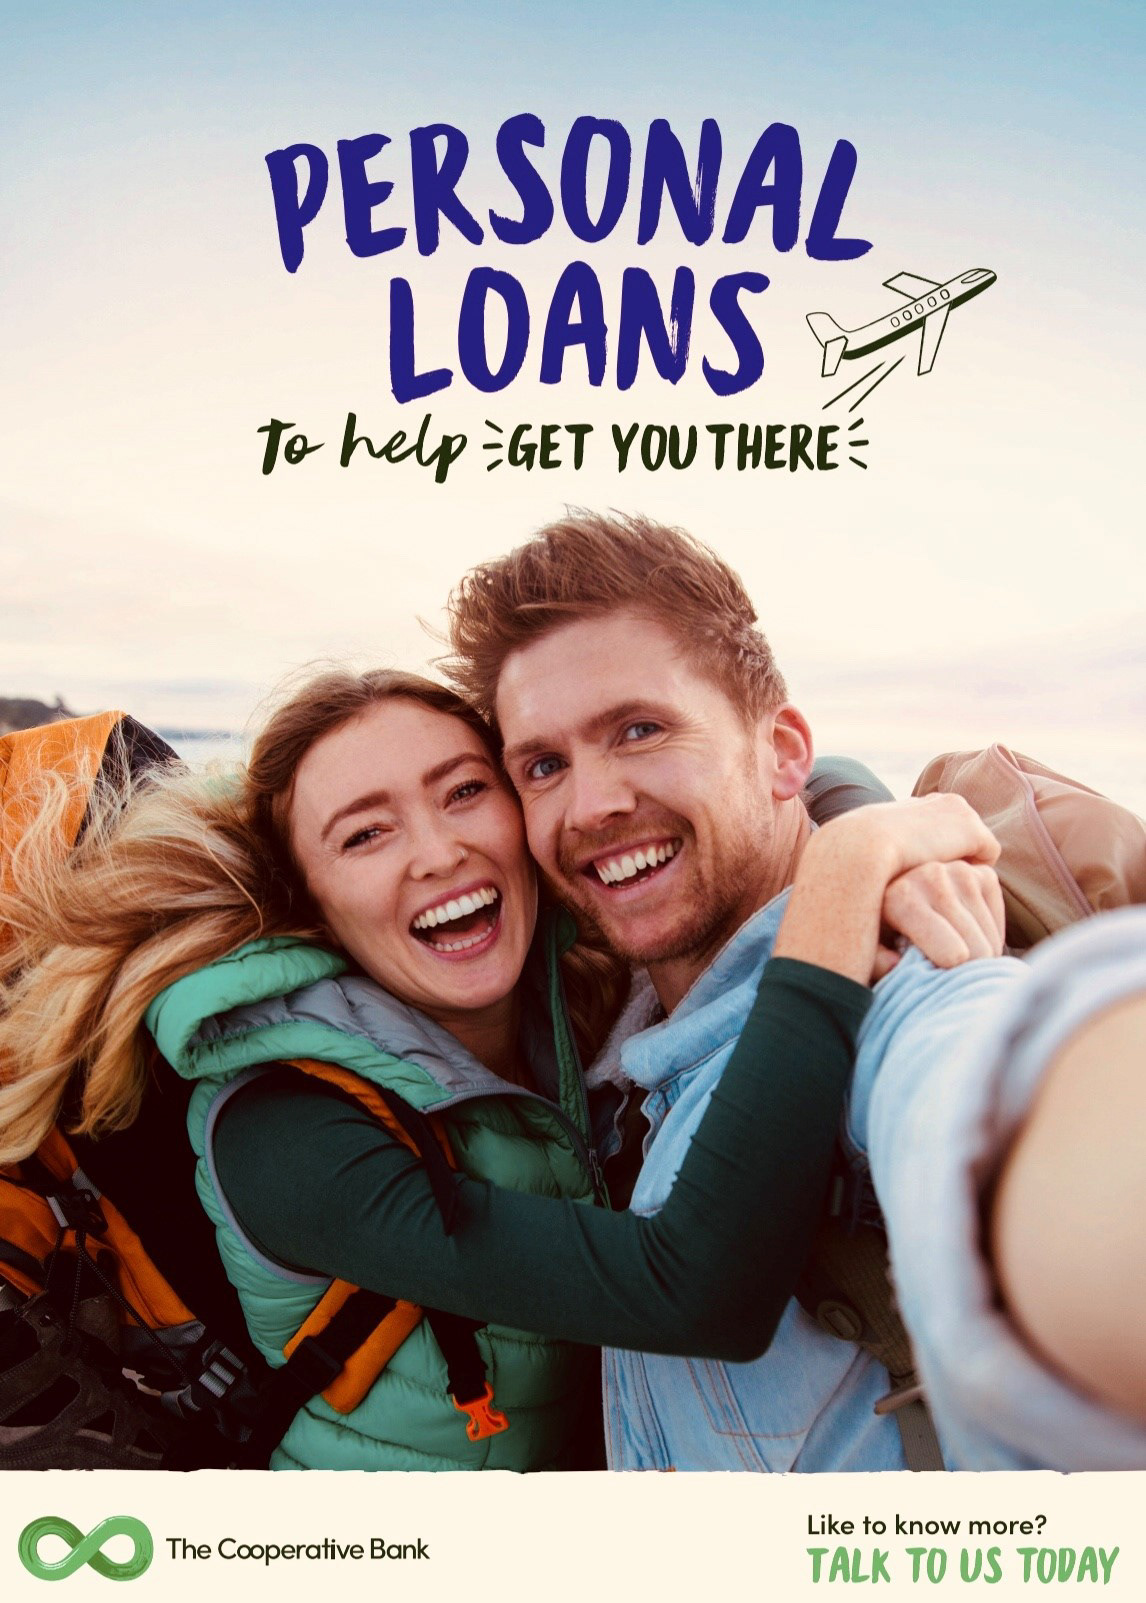 vicki leopold Photography  director coop bank nz new campaign